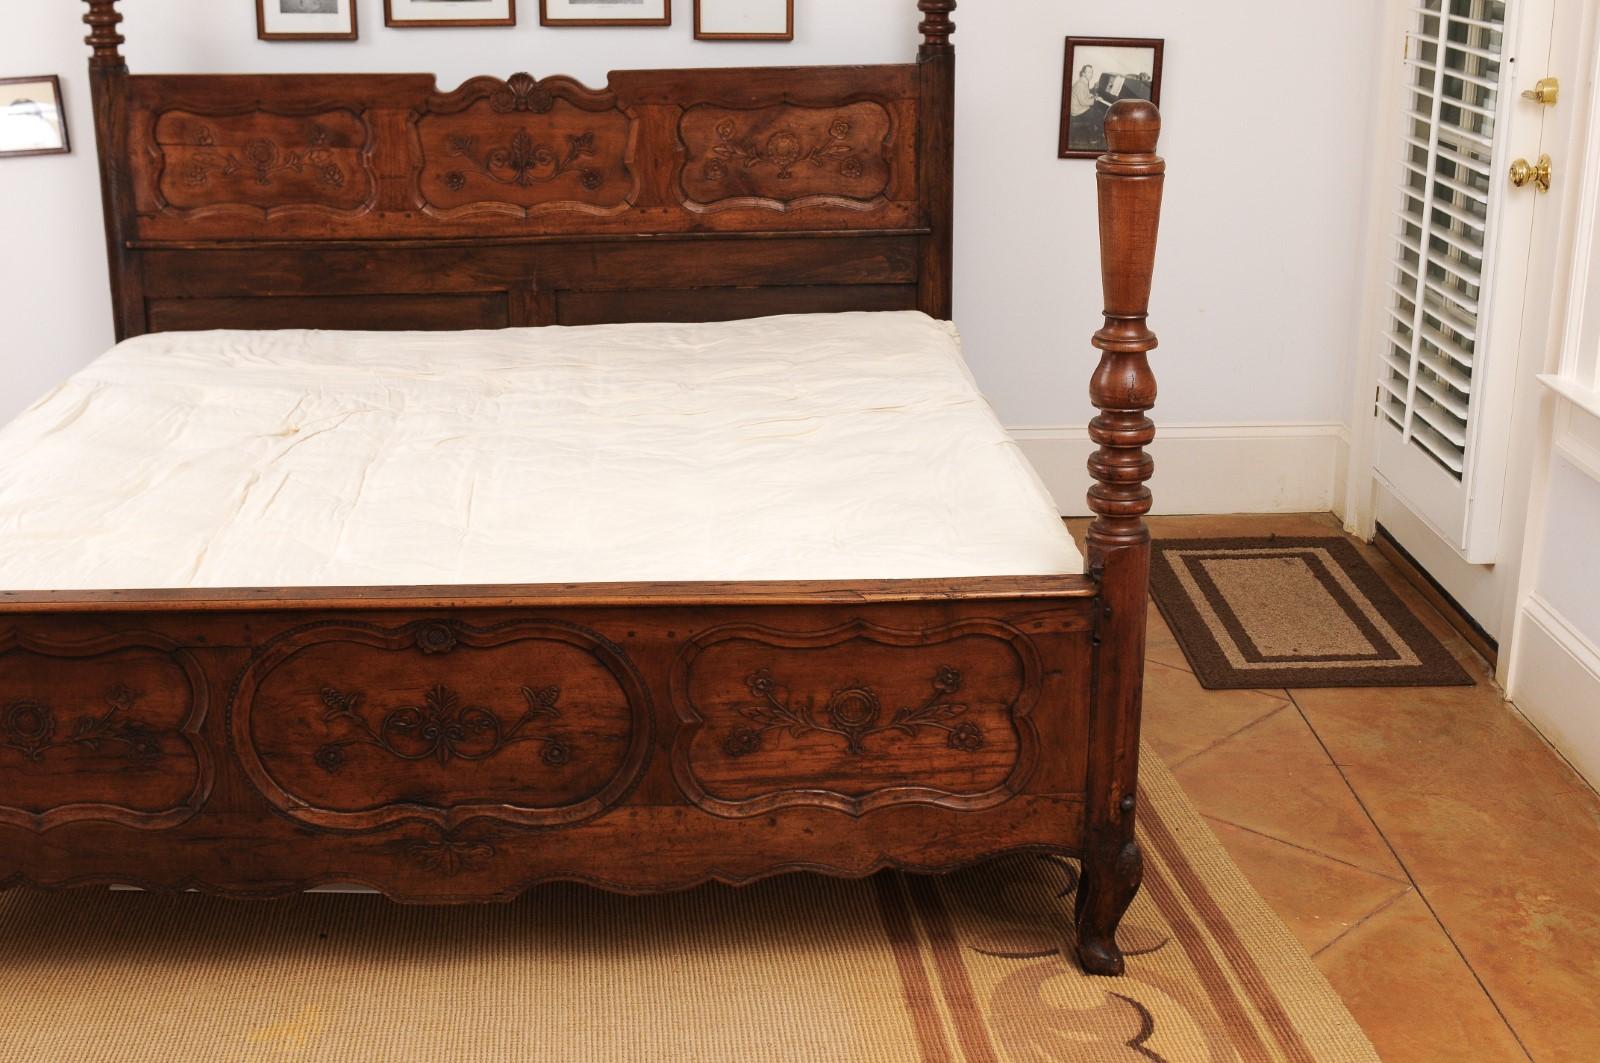 French 1870s Napoléon III Period Walnut Bed with Low-Relief Carved Floral Décor 10